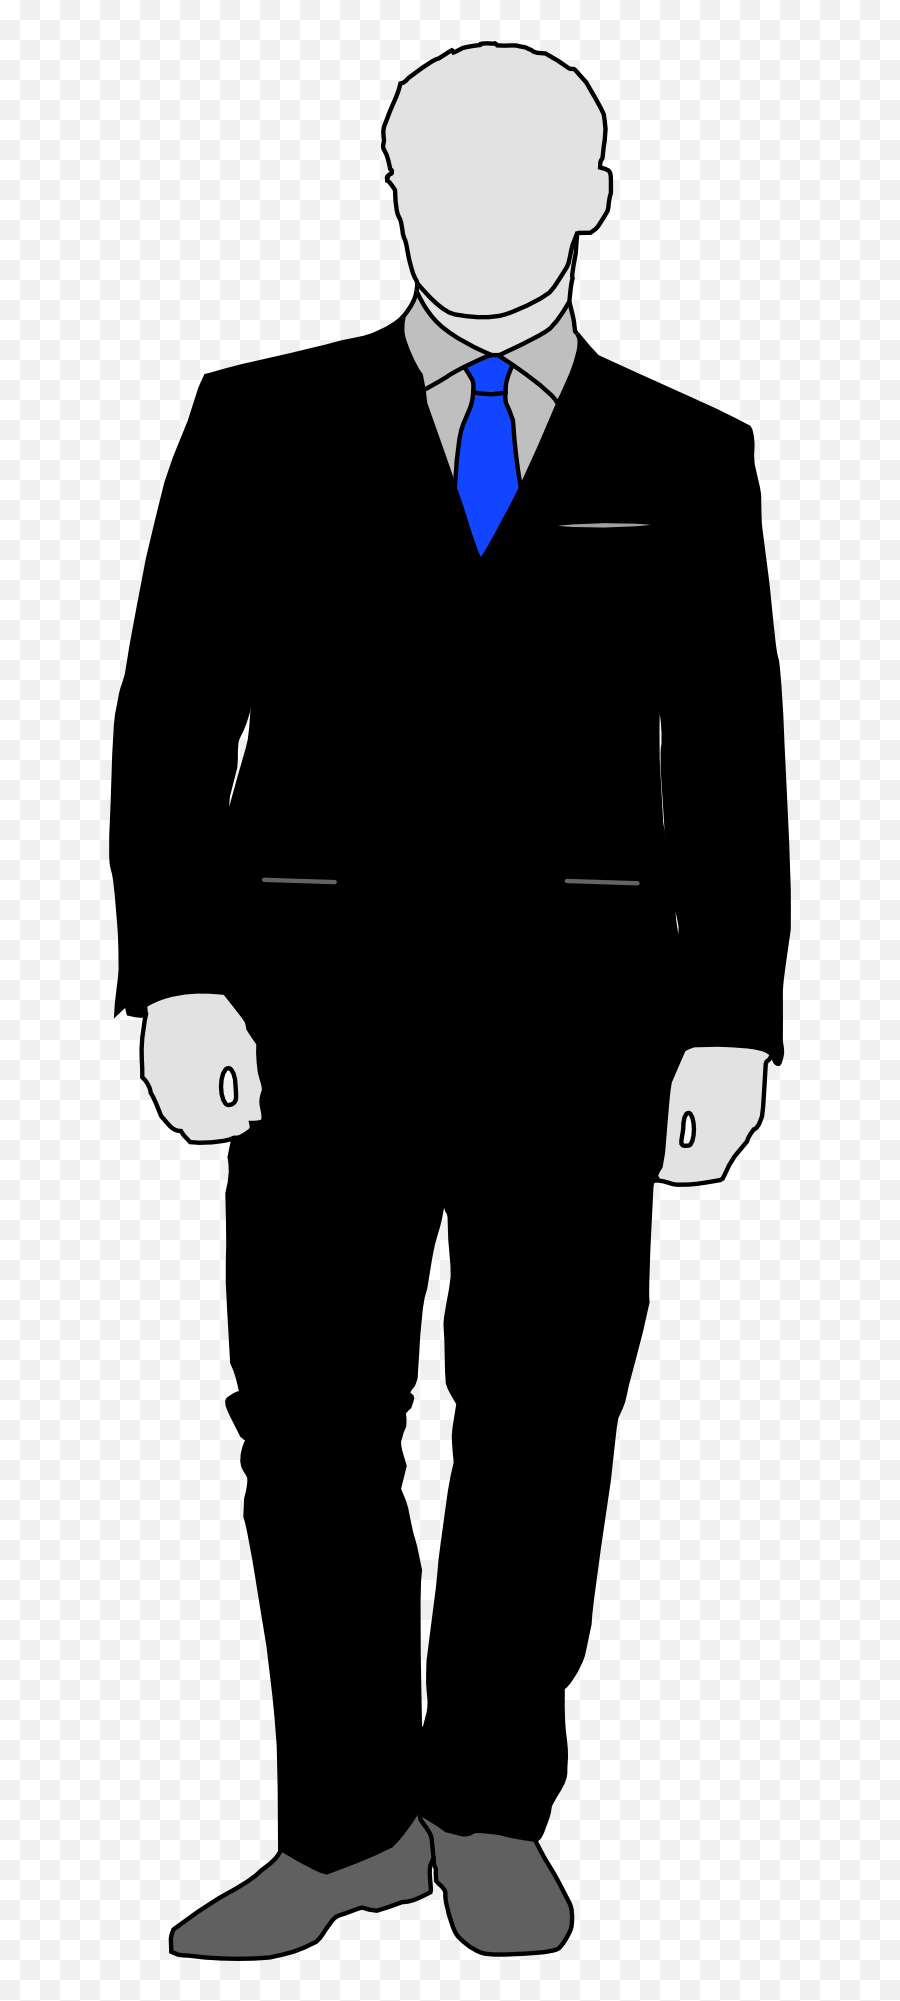 Clipart Of Businessman Free Image Download Emoji,Business Man Clipart